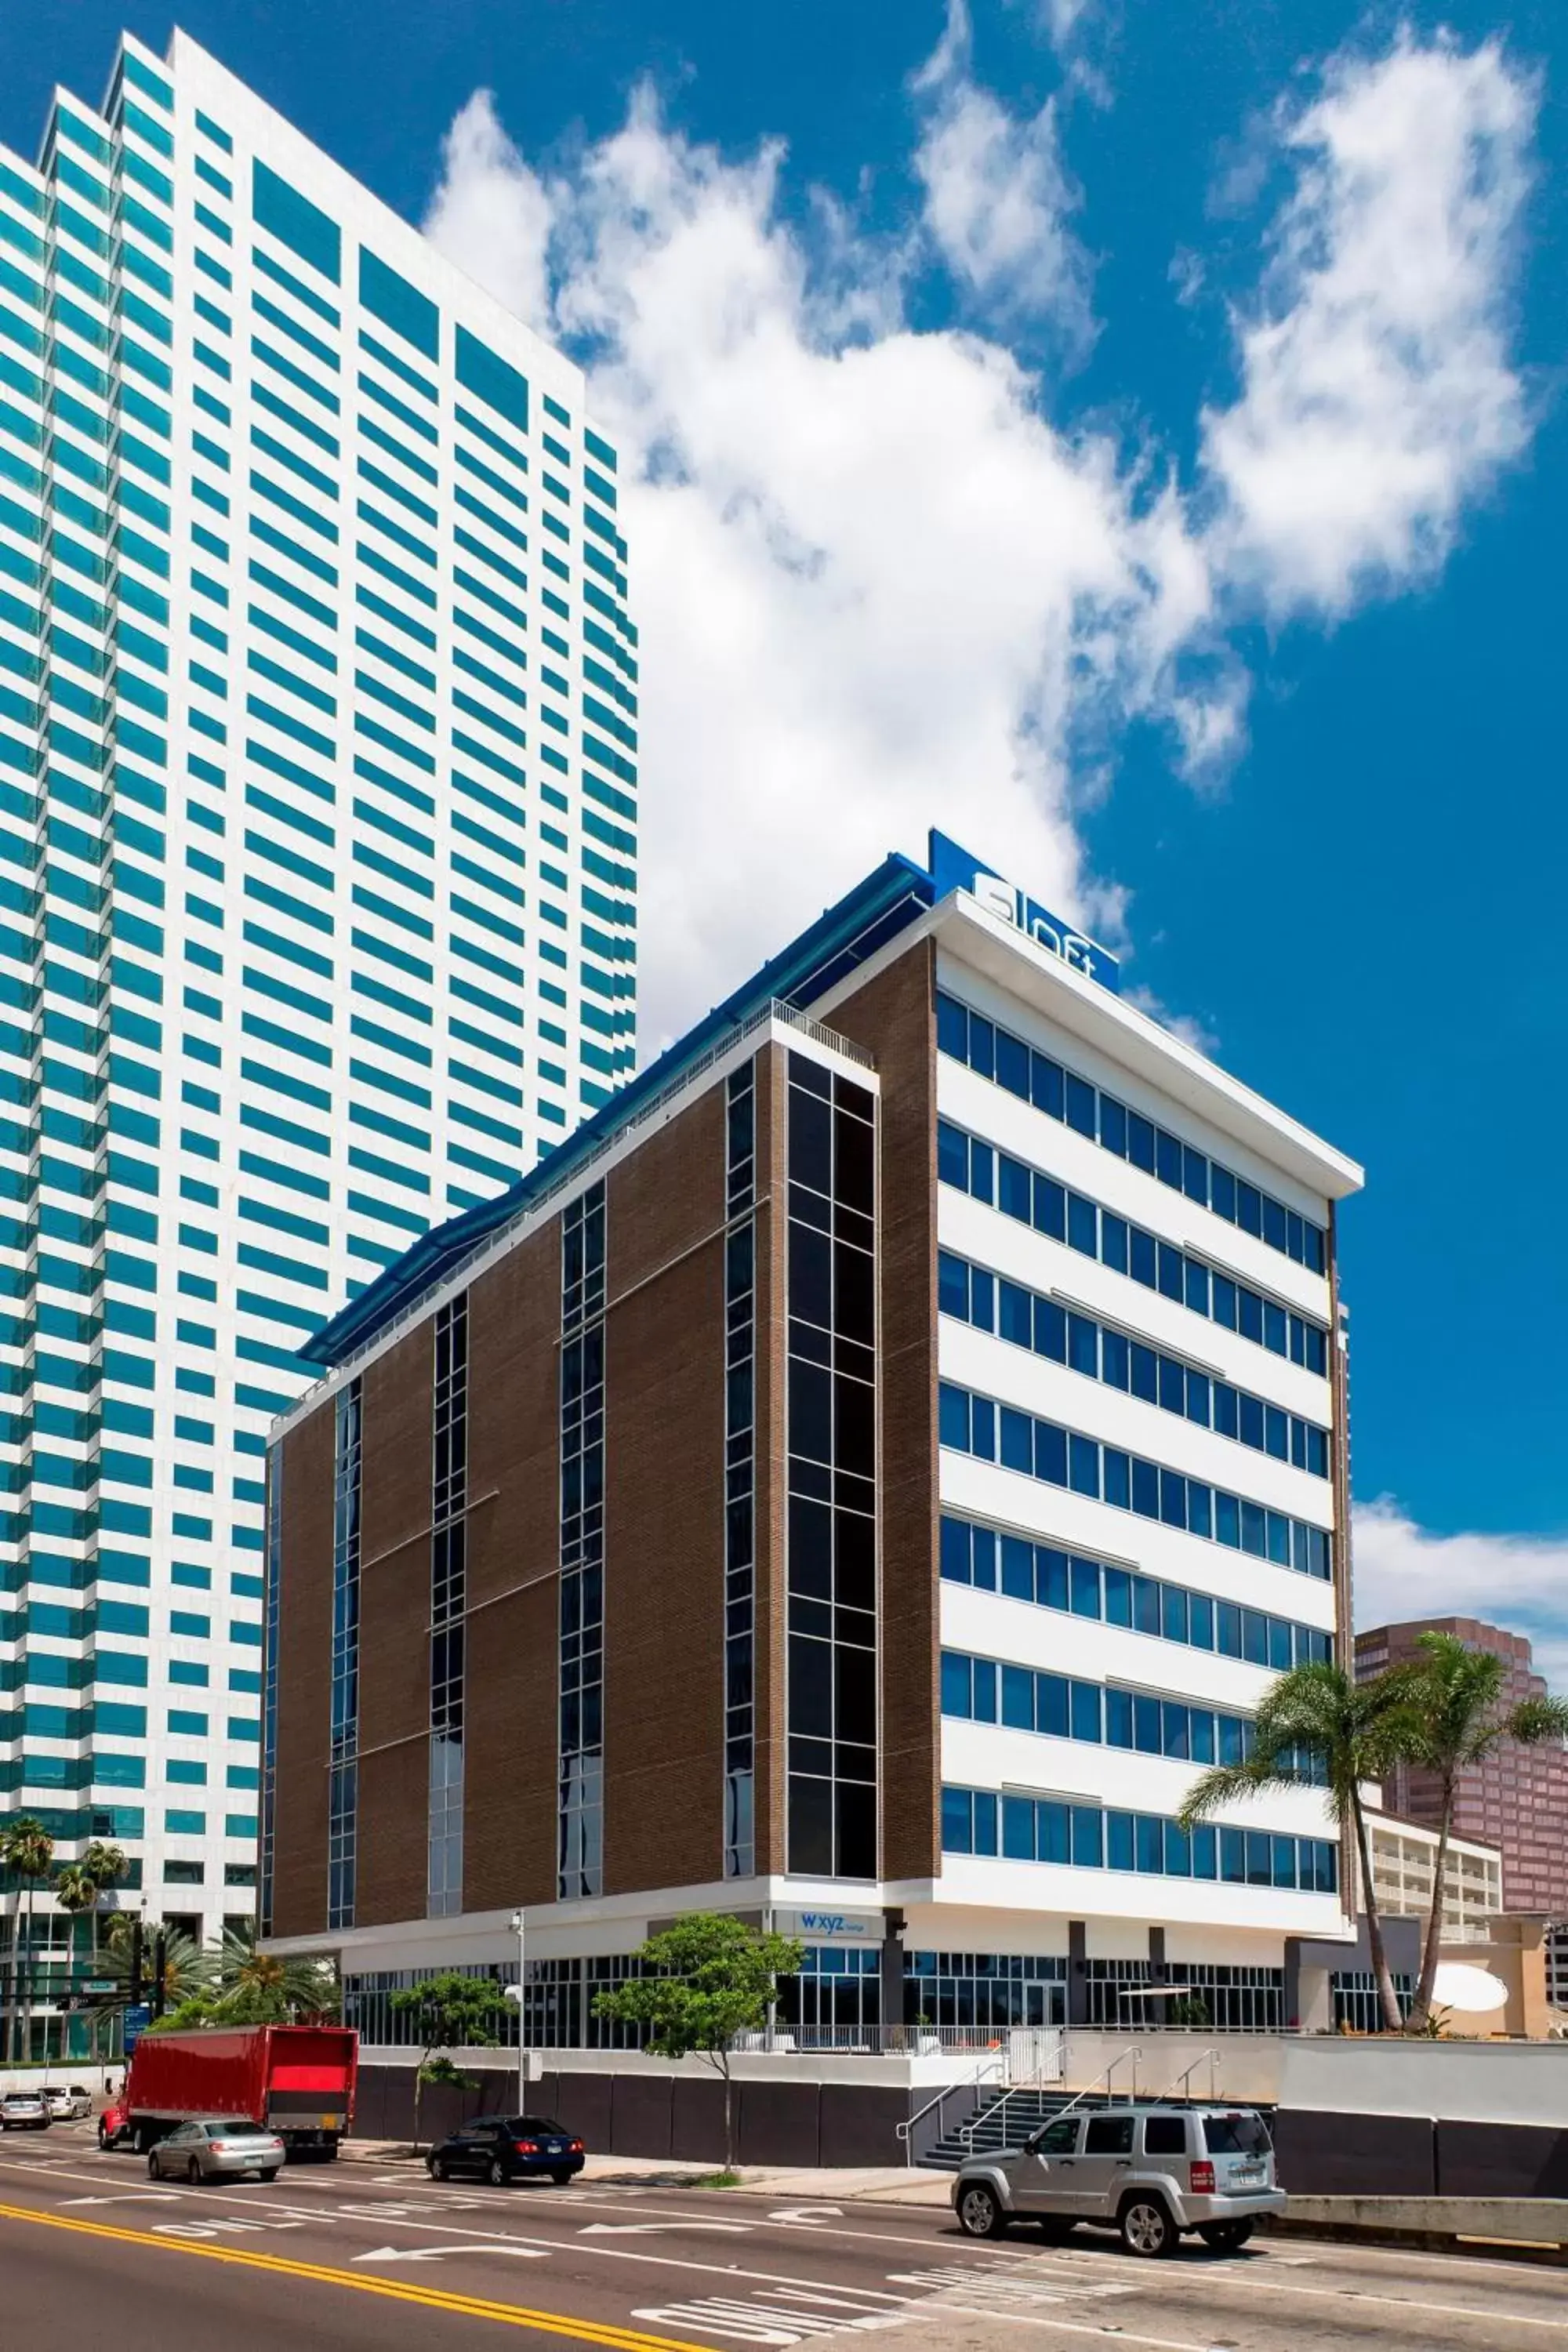 Property Building in Aloft - Tampa Downtown